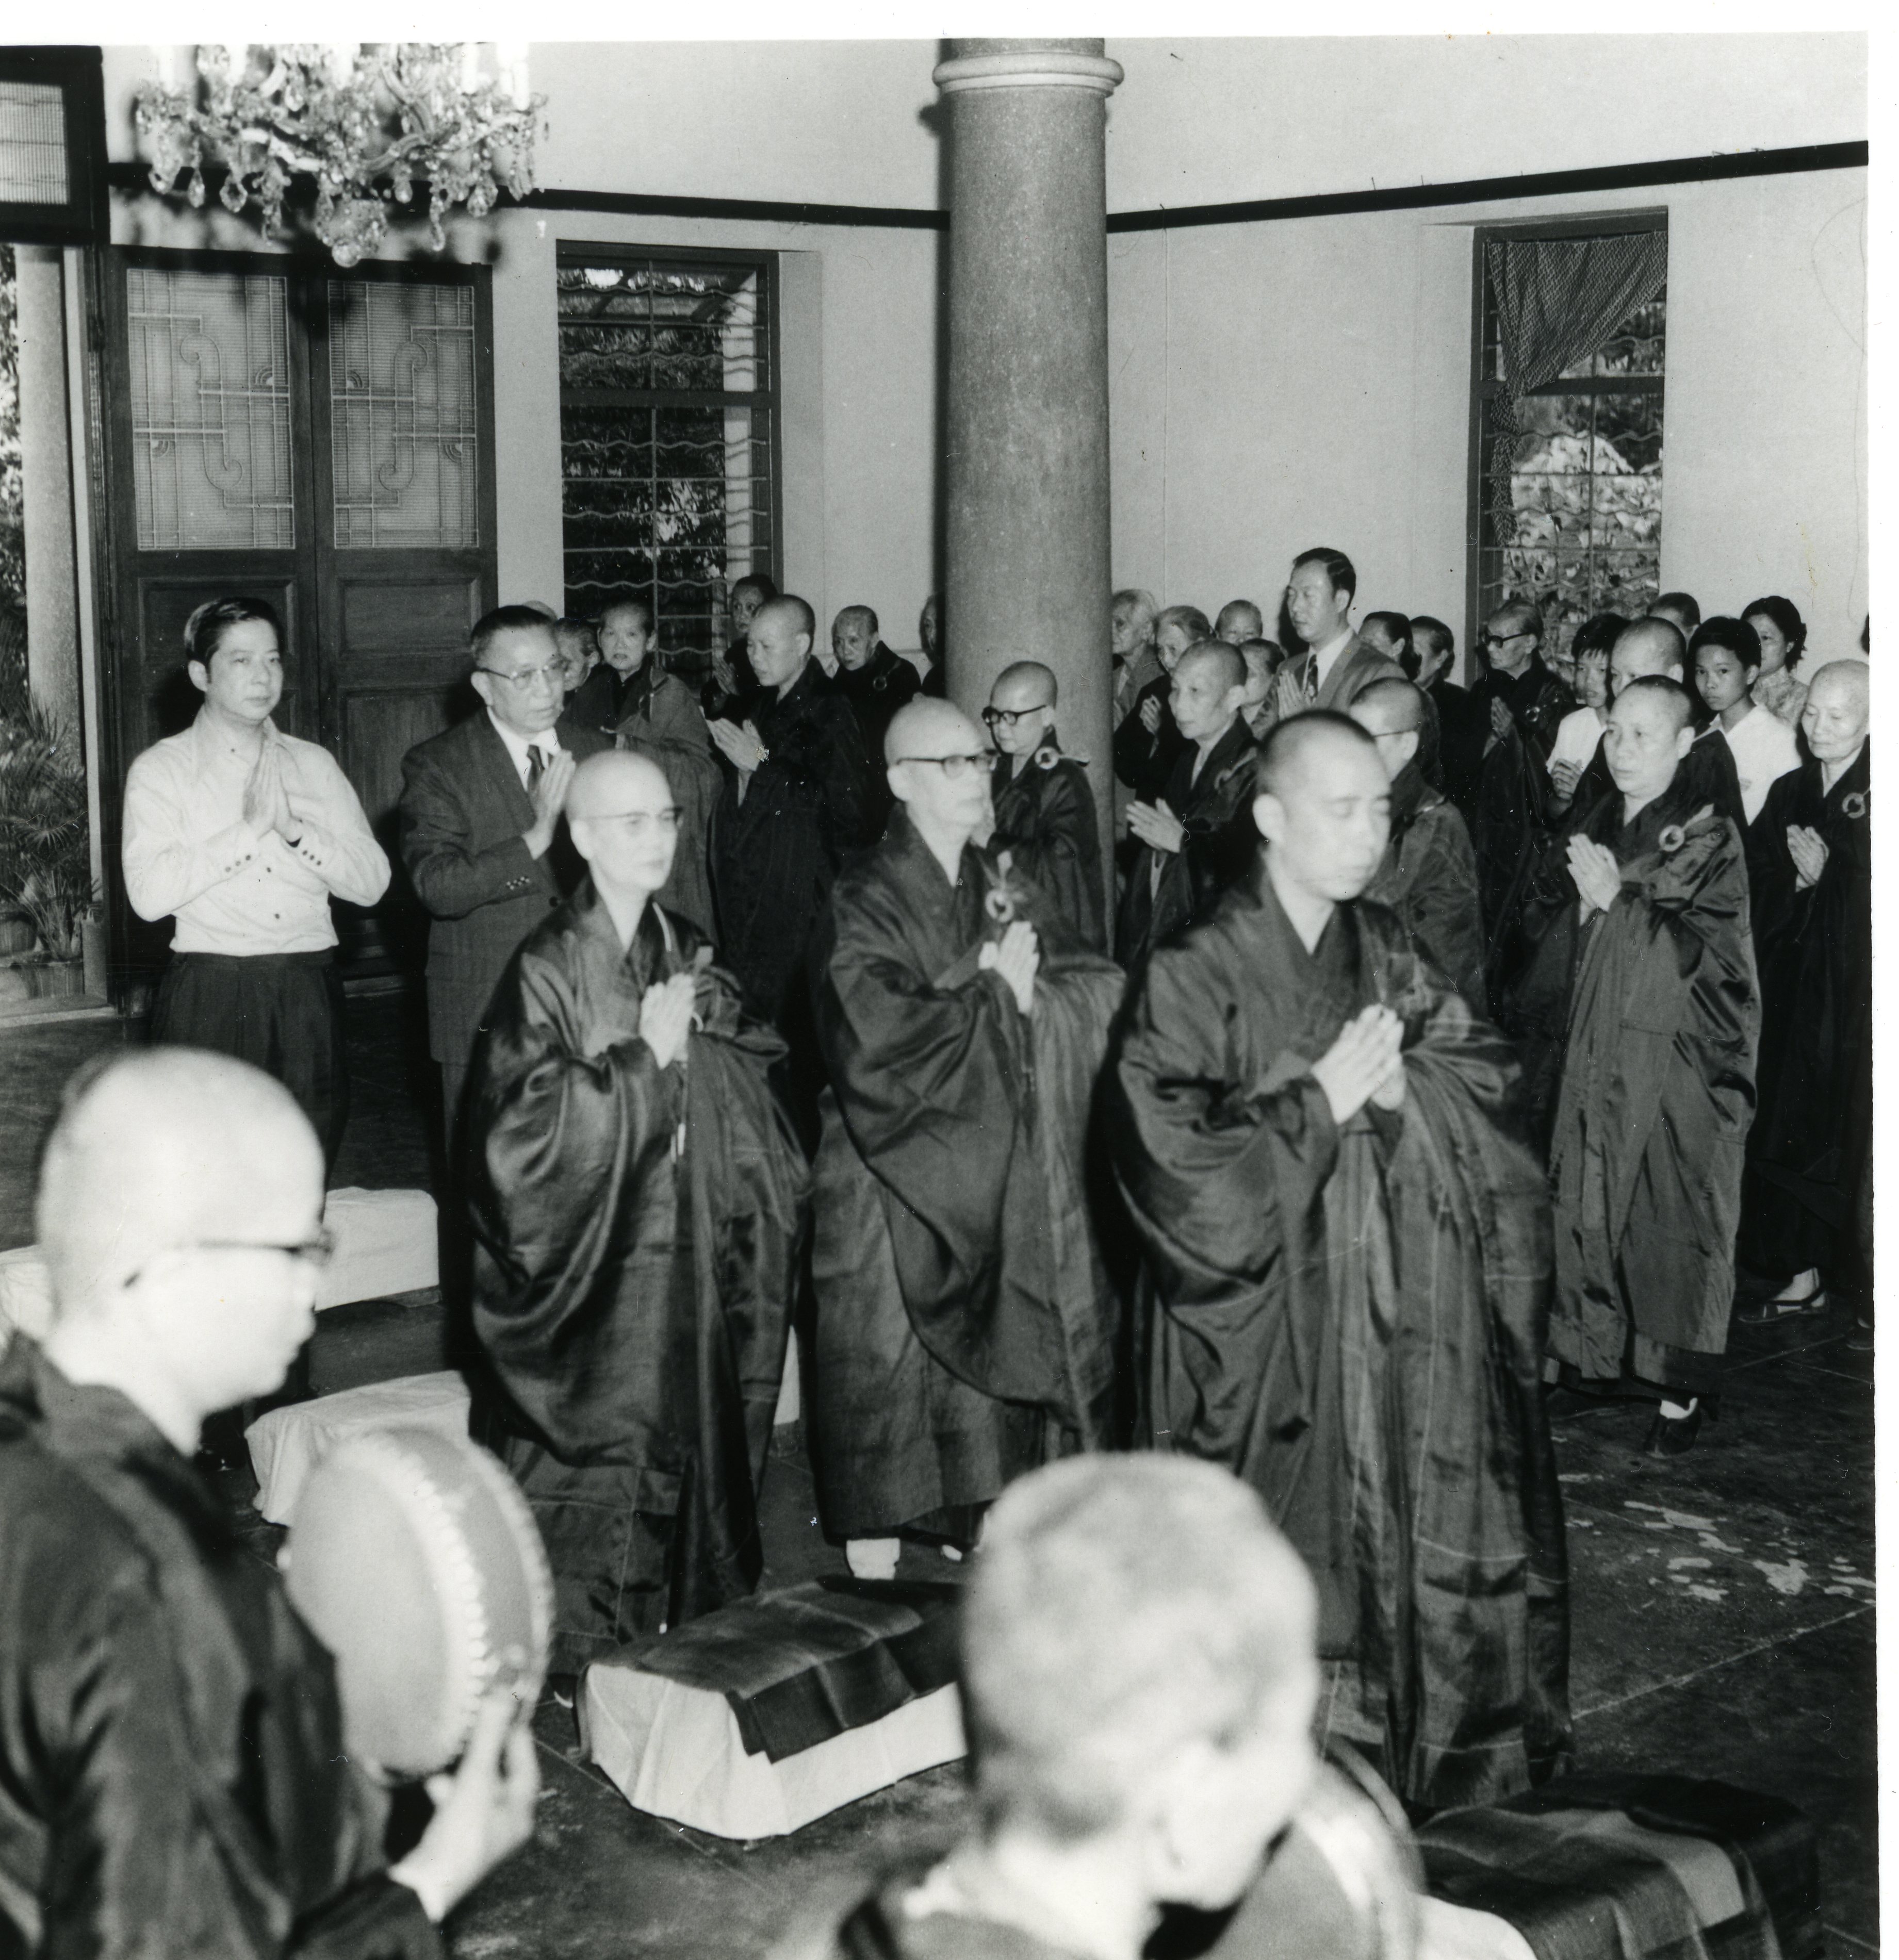 Religious service after the election of the new Board of Directors in 1972